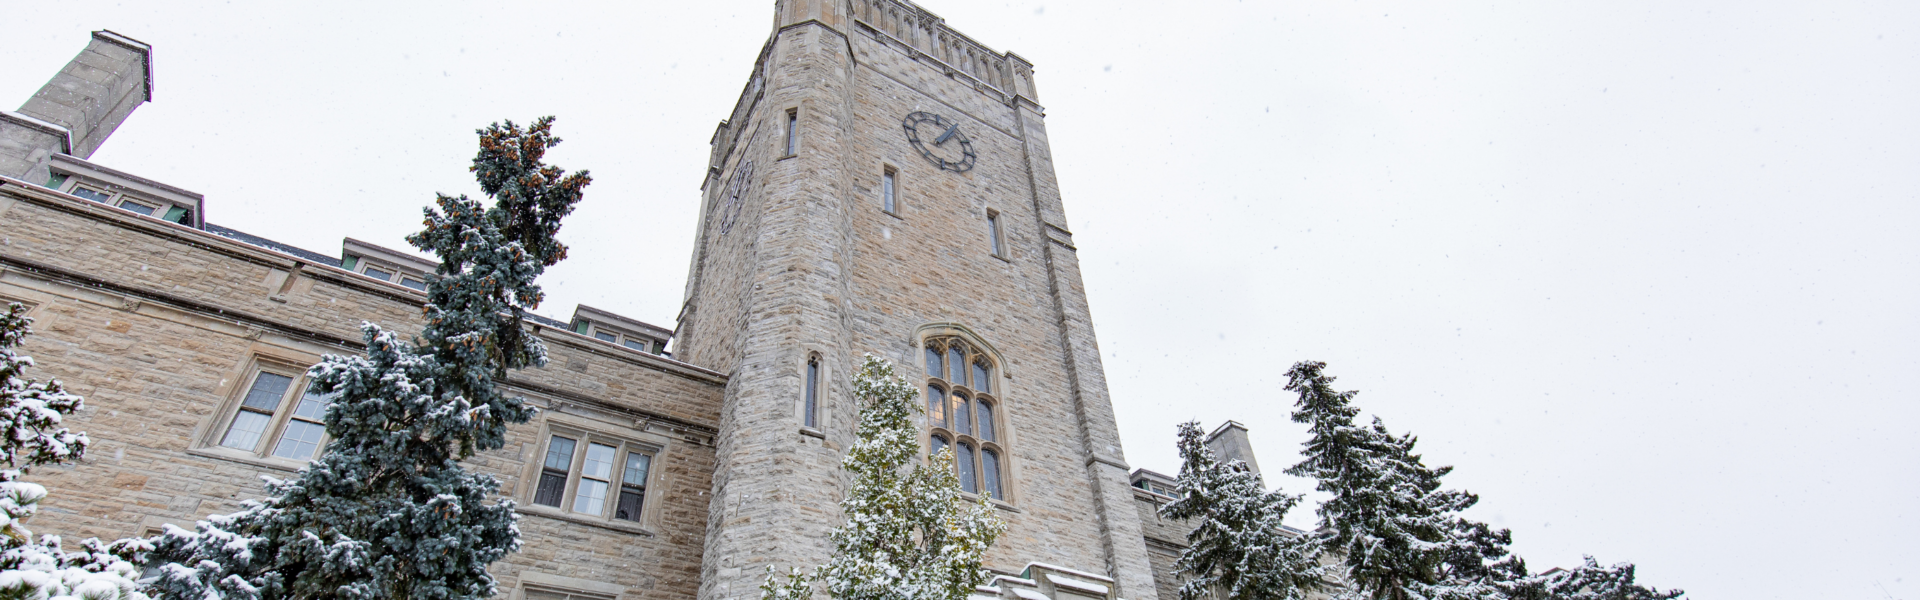 Looking up at Johnston Hall on a snowy day.